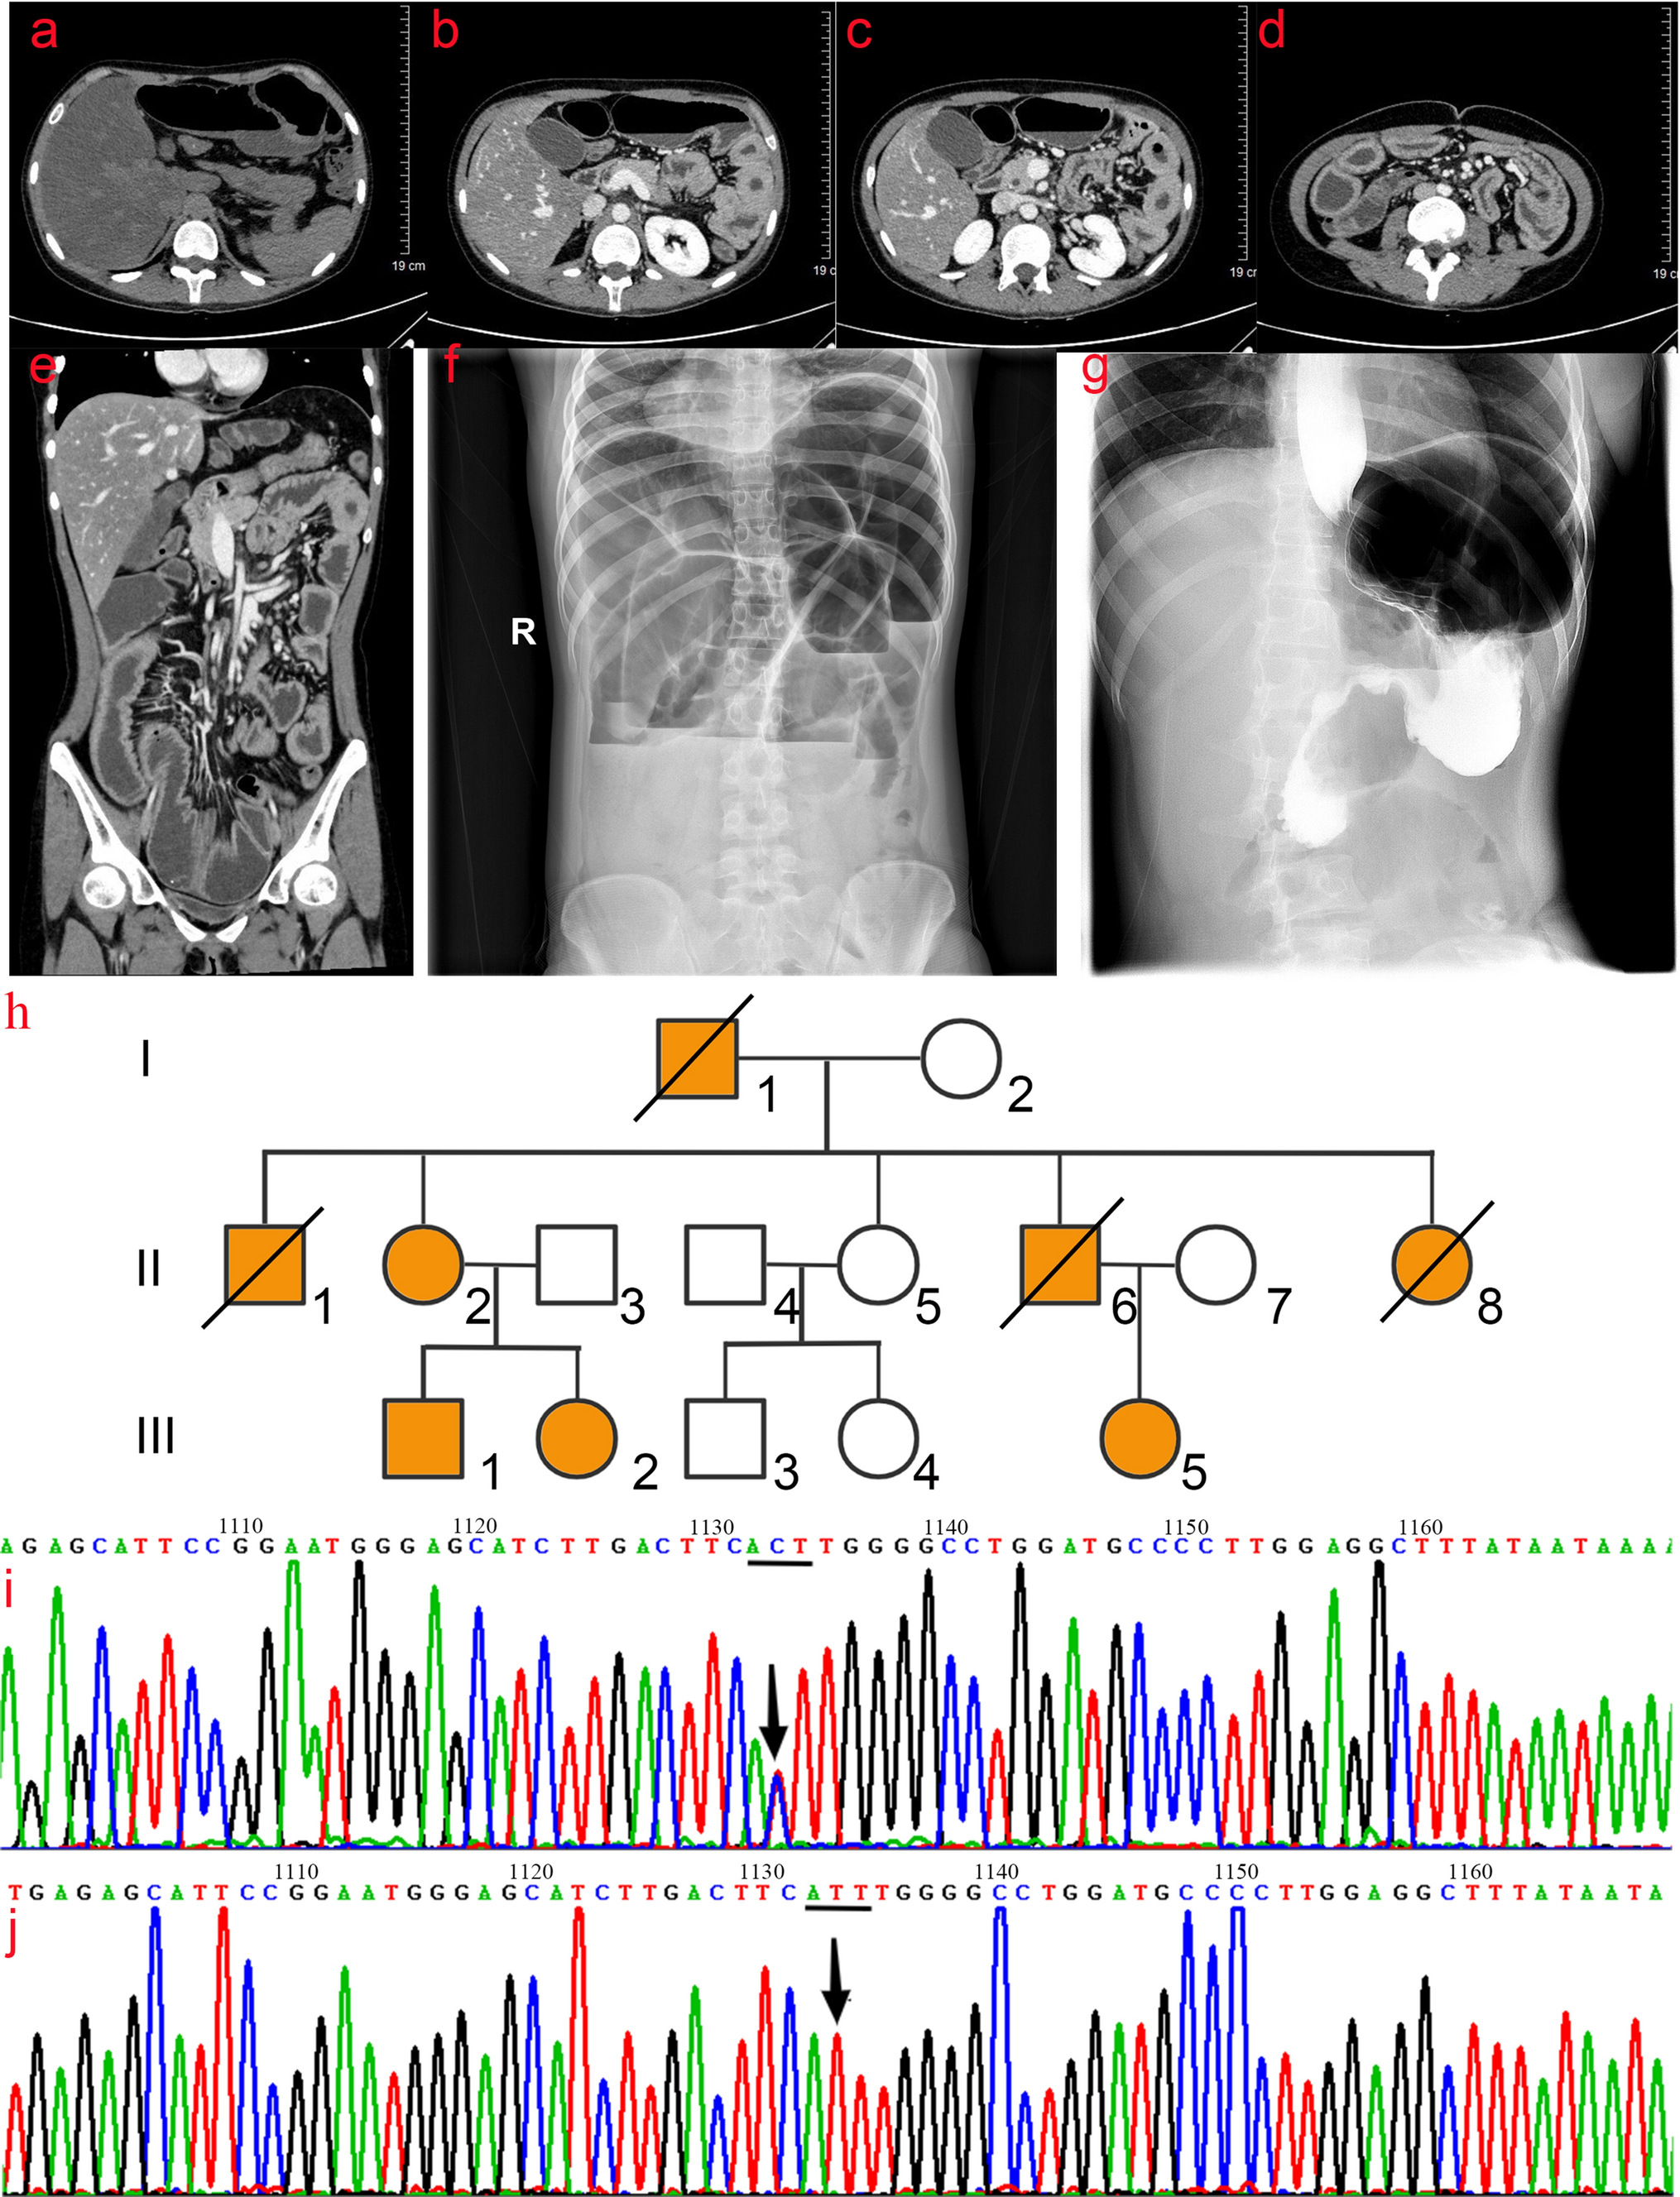 Pedigree Analysis of Nonclassical Cholesteryl Ester Storage Disease with Dominant Inheritance in a LIPA I378T Heterozygous Carrier